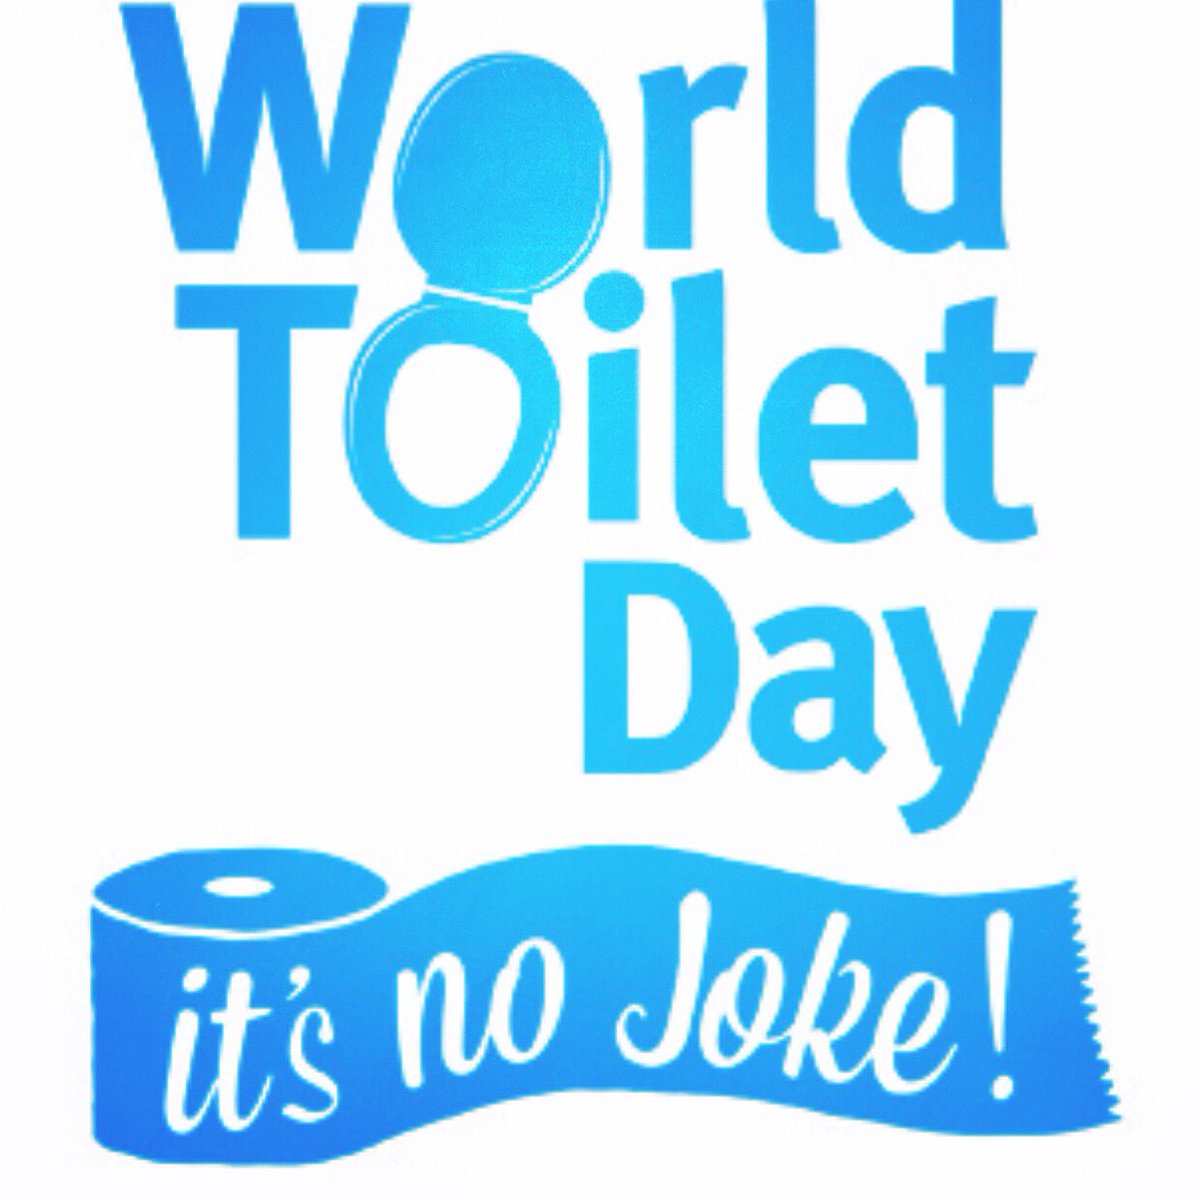 “World Toilet Day” May sound like a joke, but, according to Saneux, it’s a legitimate holiday established by the World Toilet Organization and was designed to heighten awareness on sanitation issues and how they impact the well-being of the entire globe.